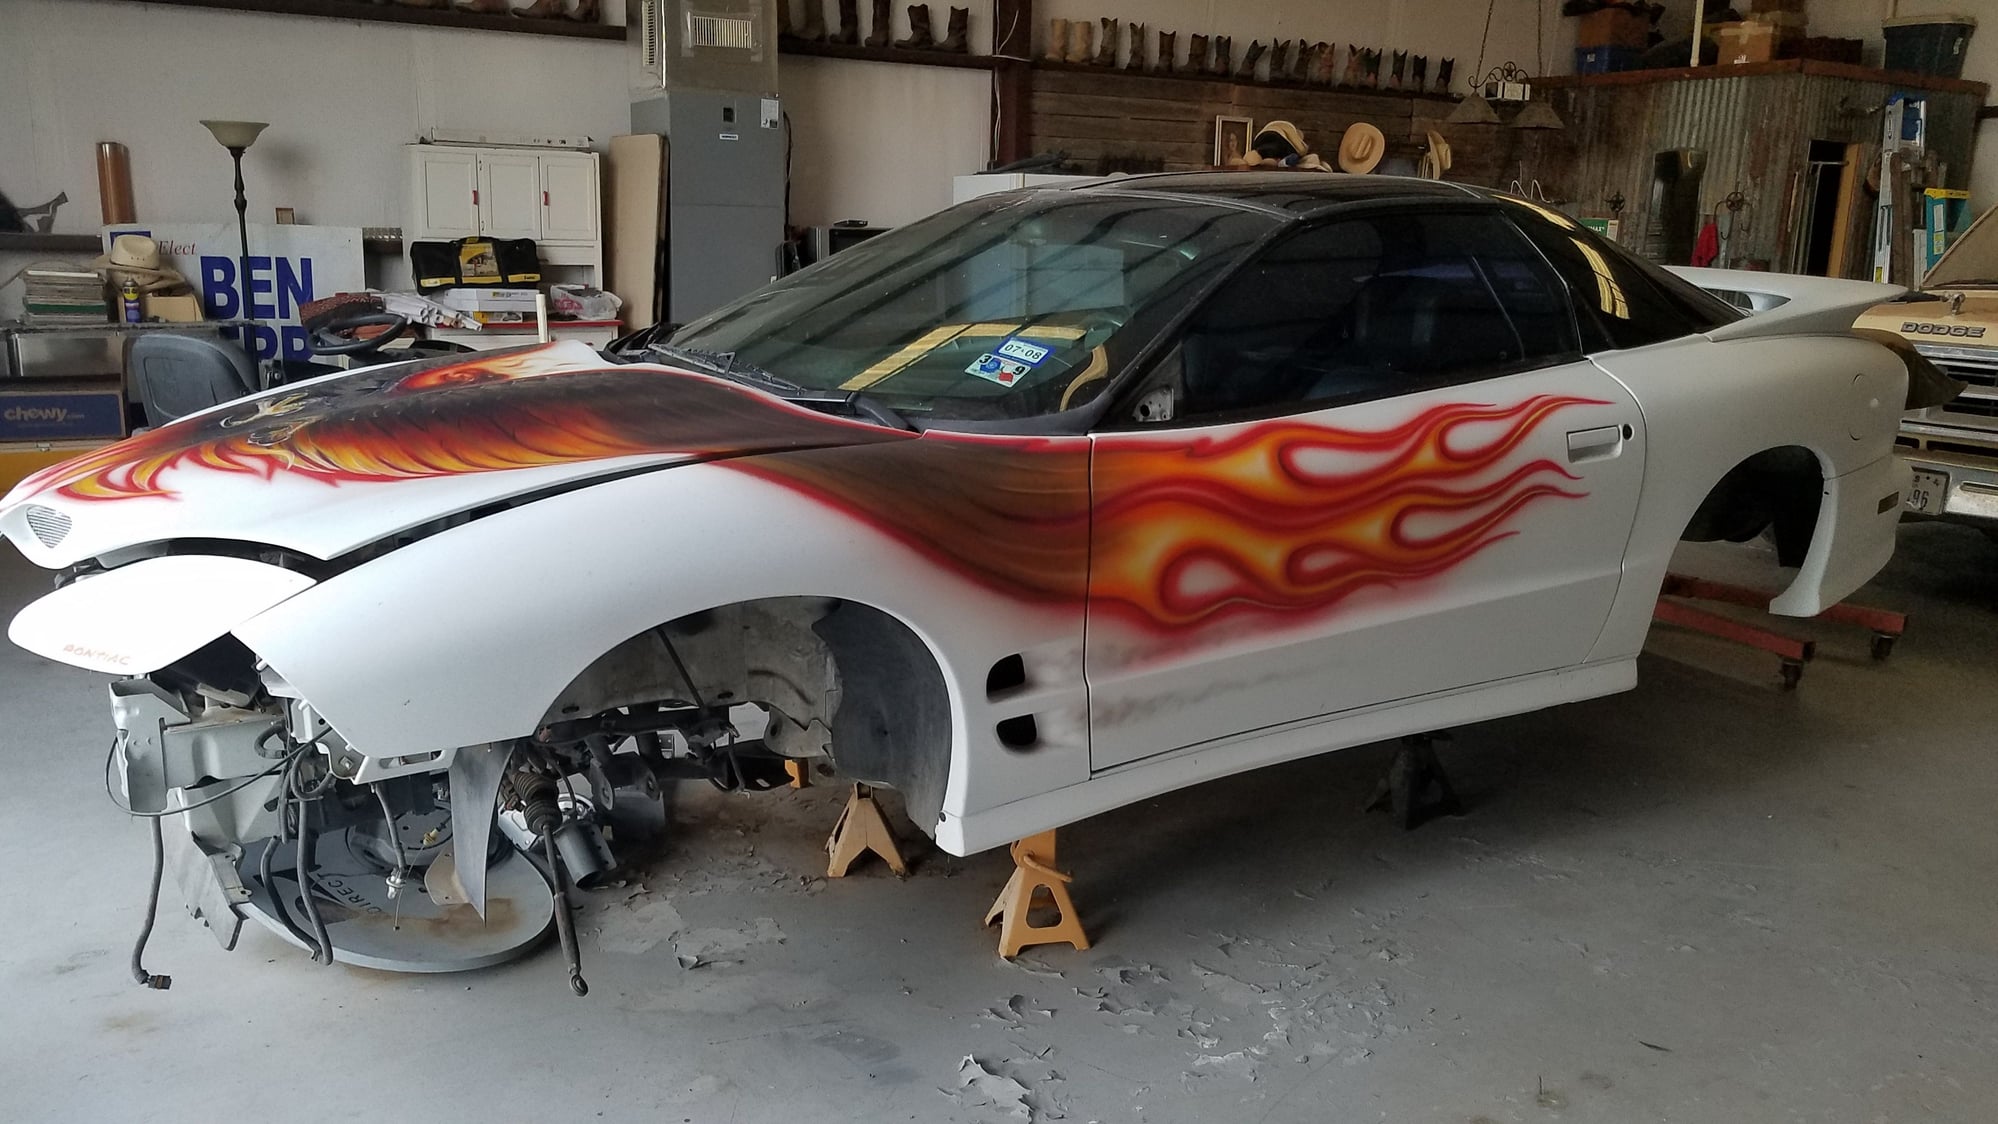 2001 Pontiac Firebird - 2001 WS.6 Trans-Am Roller - Used - VIN 2G2FV22G812112325 - 54,000 Miles - Other - 2WD - Automatic - White - Woodway, TX 76712, United States